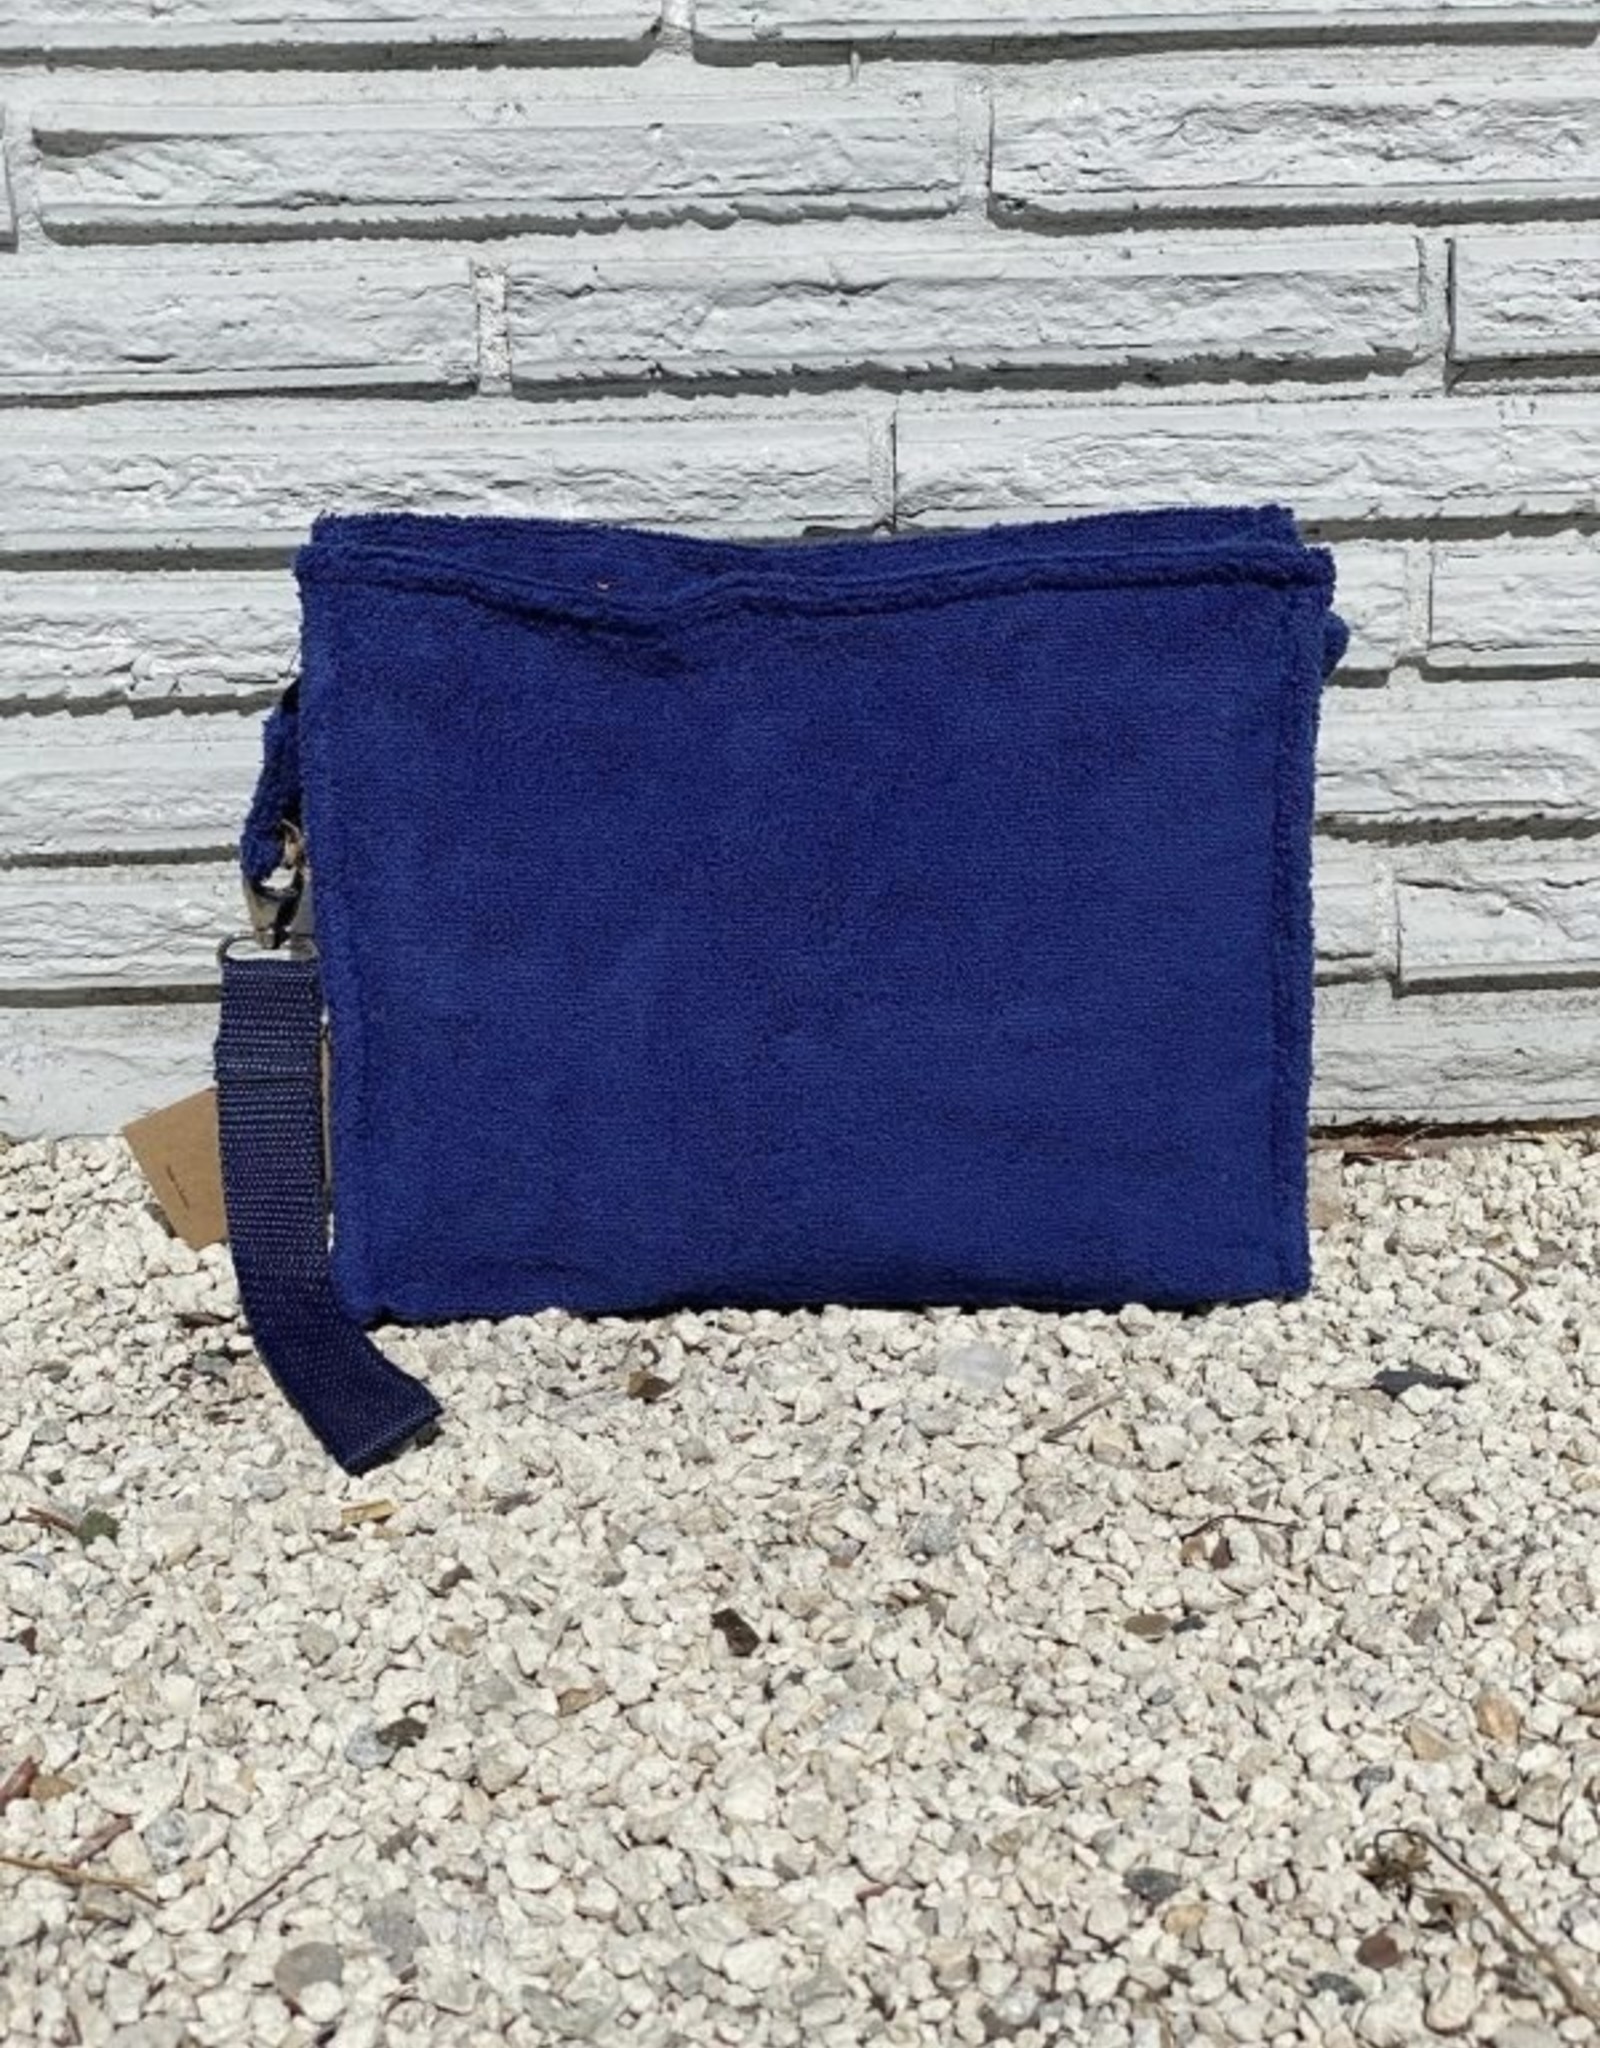 Light Terry Pouch